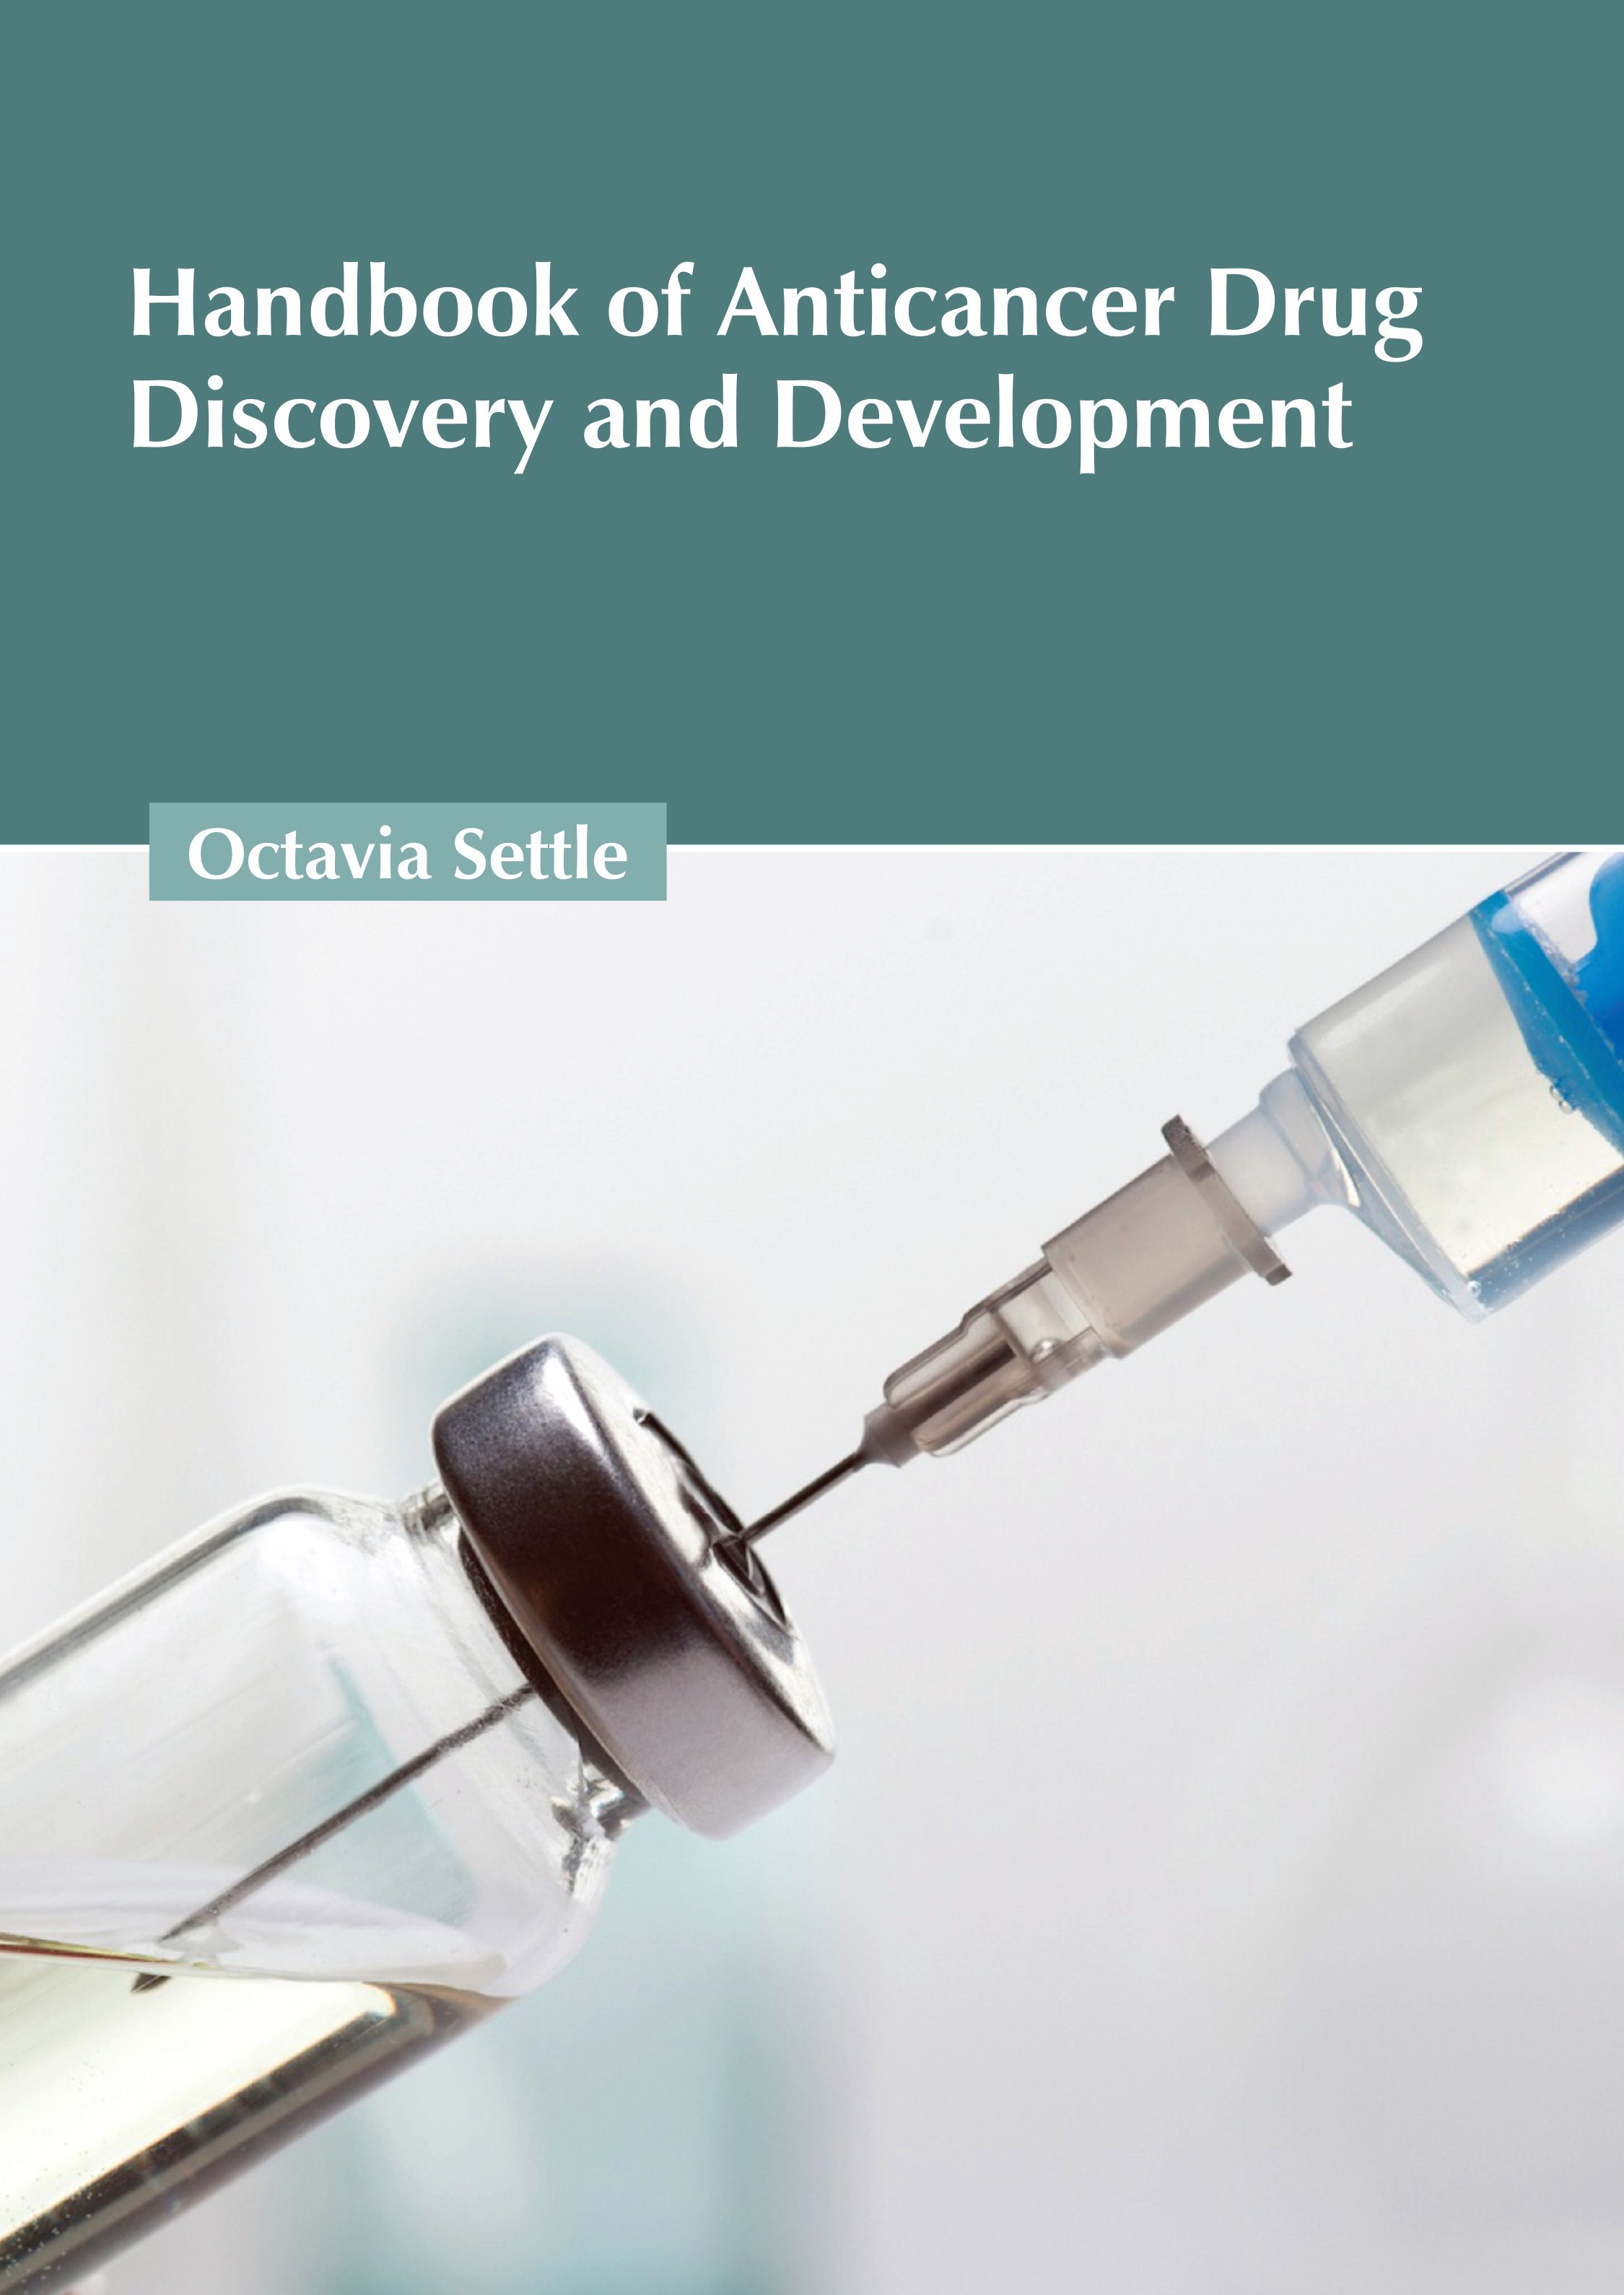 exclusive-publishers/american-medical-publishers/handbook-of-anticancer-drug-discovery-and-development-9781639278800